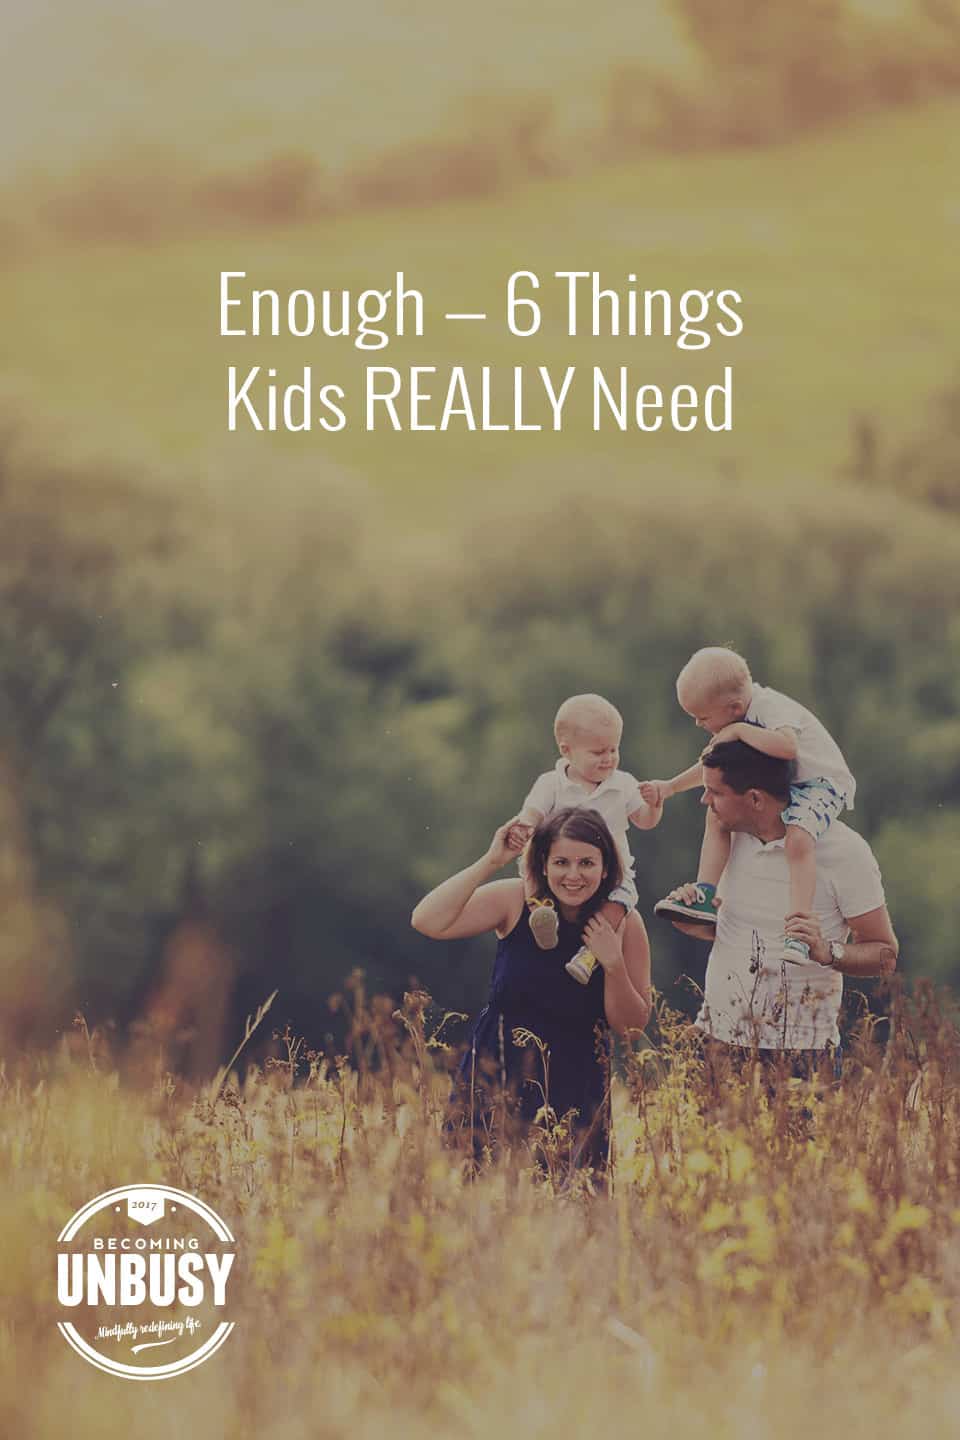 Enough — 6 Things Kids REALLY Need *Loving this post and this Becoming UnBusy site